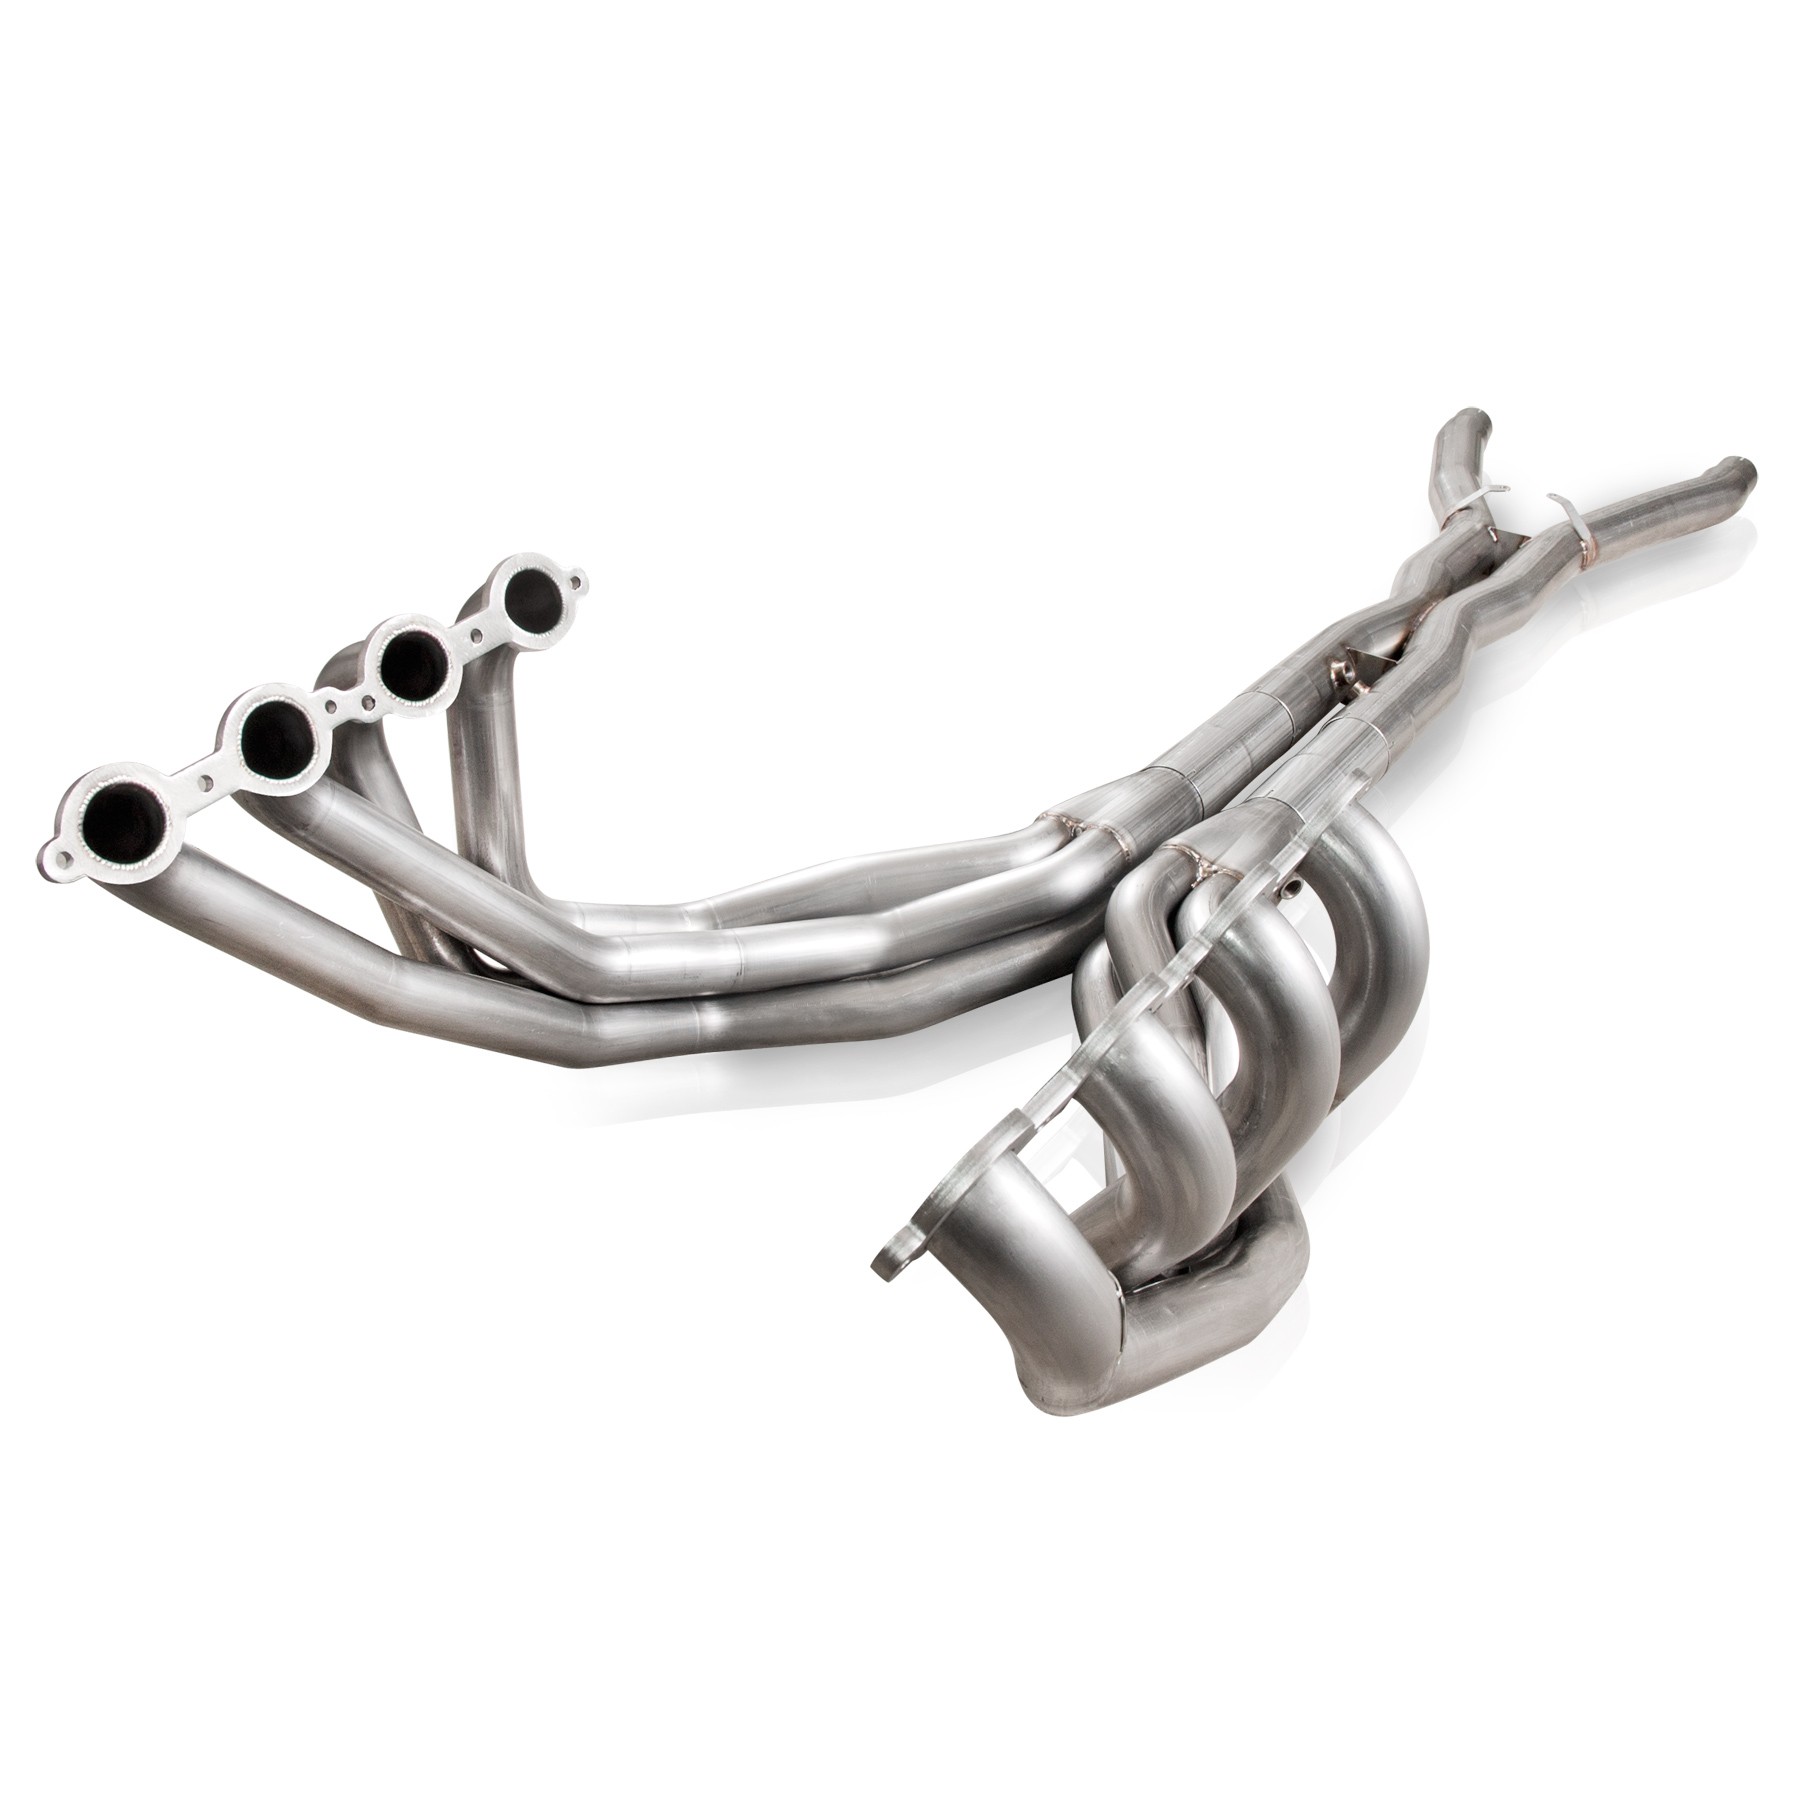 2009-2013 Corvette C6 Stainless Works 2" Long Tube Headers w/Offroad 3" Xpipe